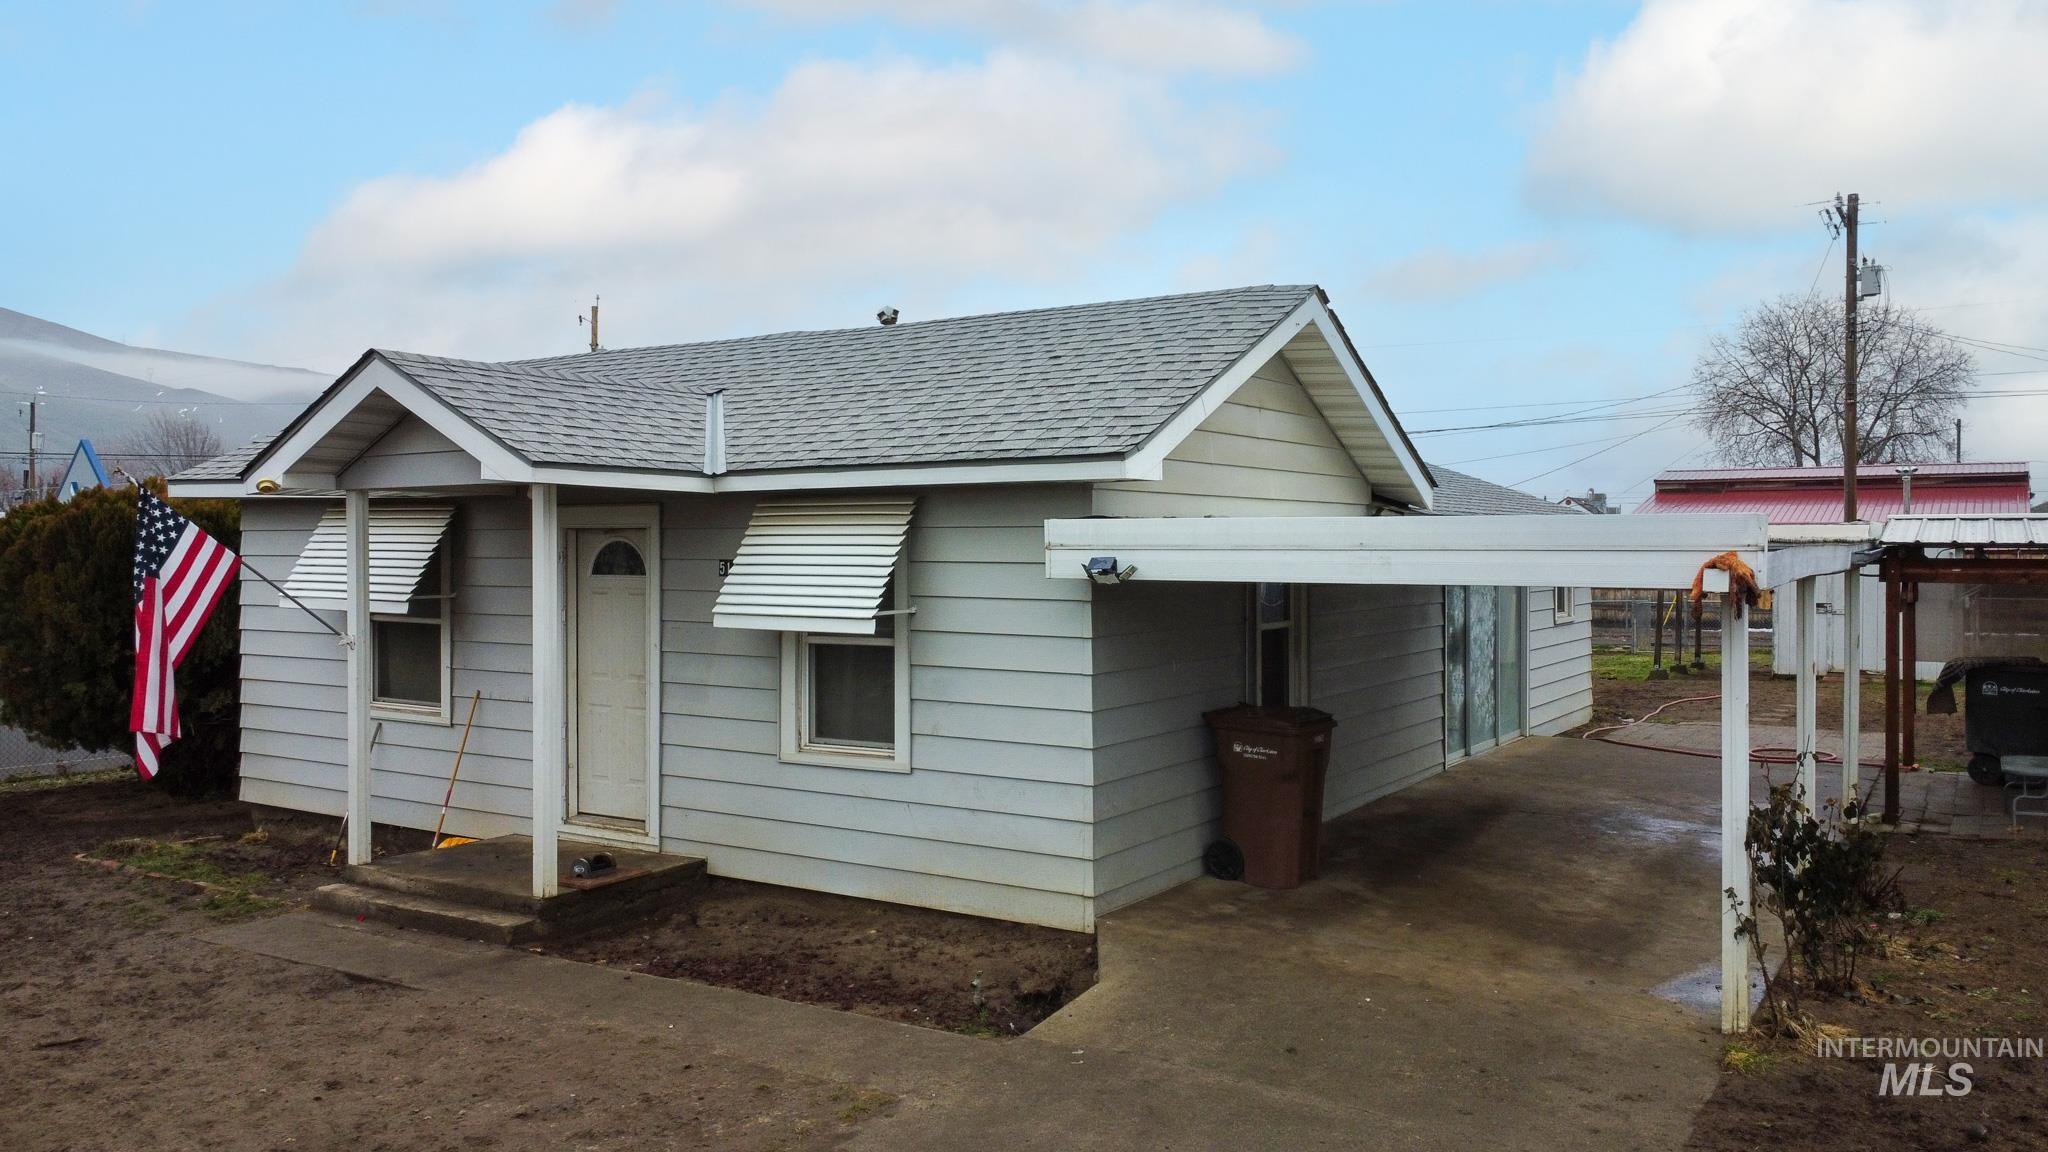 511 8th St., Clarkston, Washington 99403, 2 Bedrooms, 1 Bathroom, Residential For Sale, Price $179,000,MLS 98898928